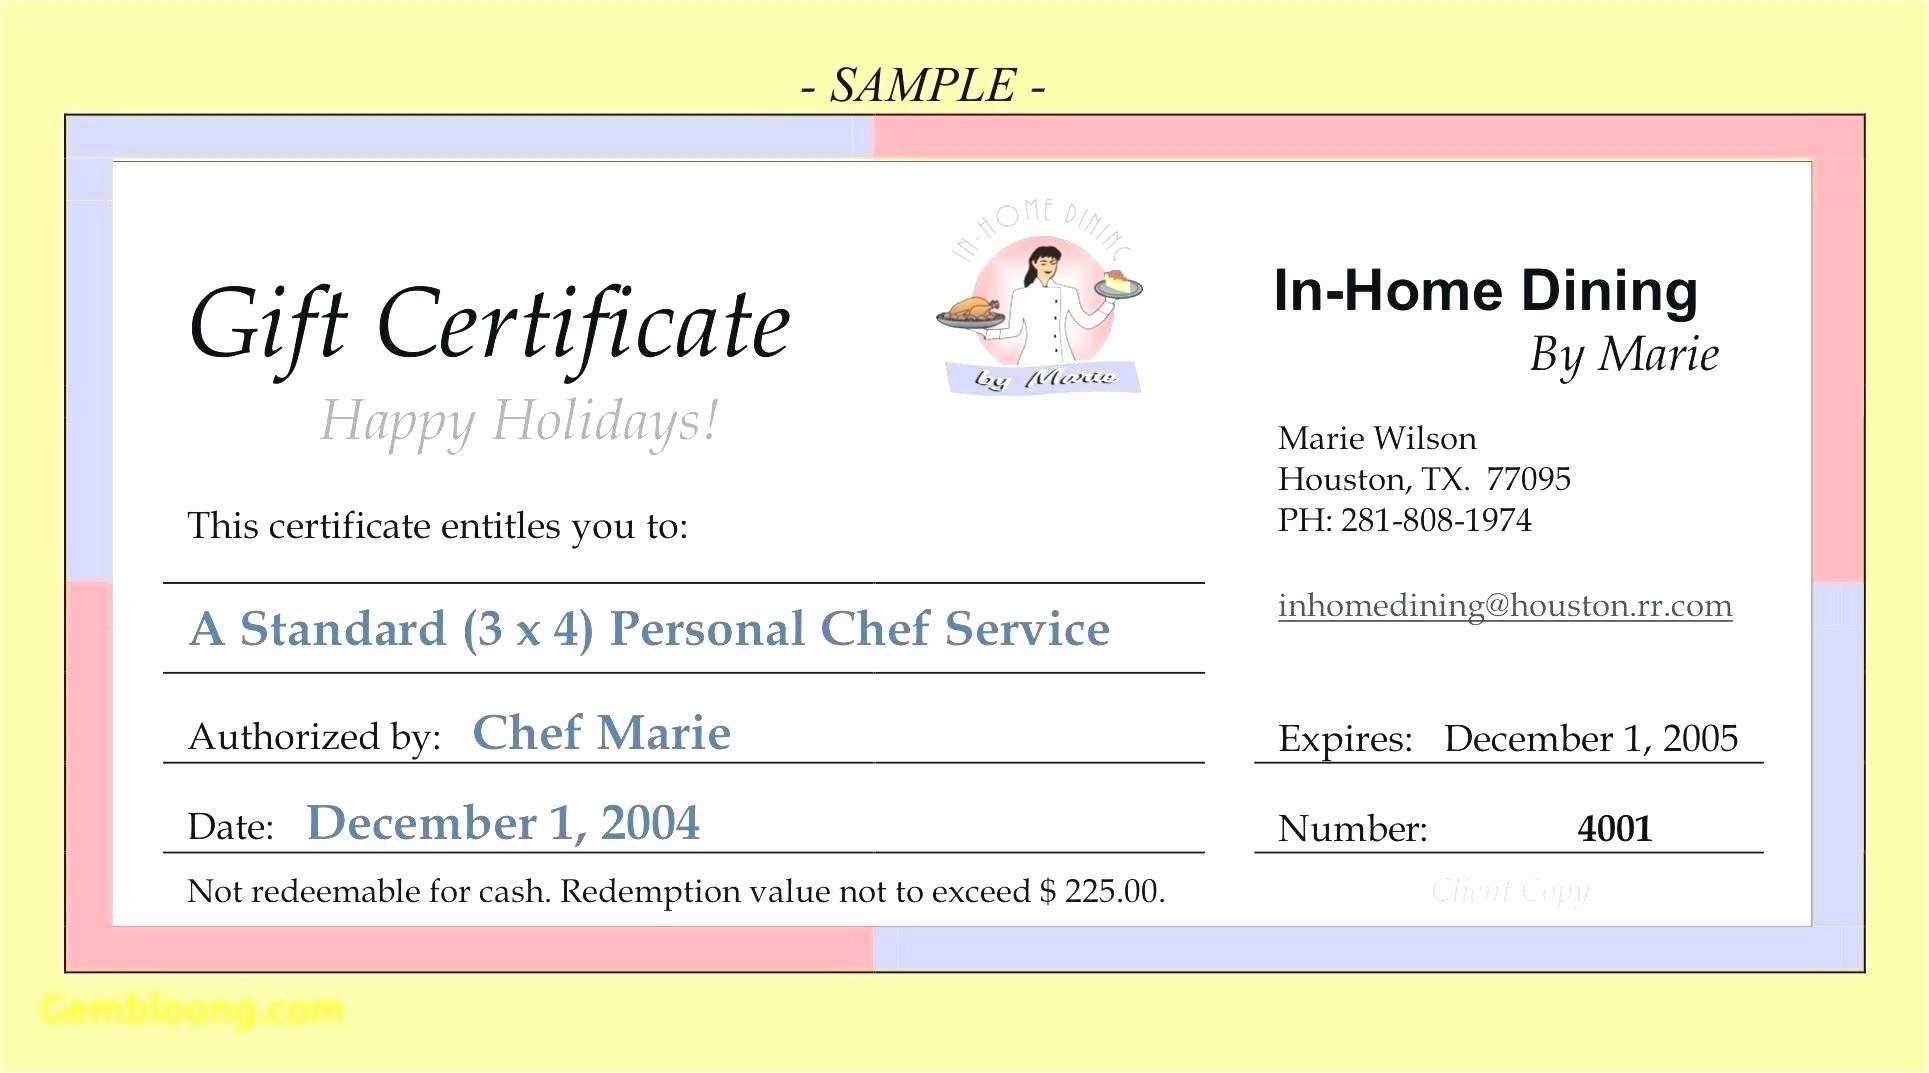 30 The Bearer Of This Certificate Is Entitled To Template Intended For This Certificate Entitles The Bearer Template